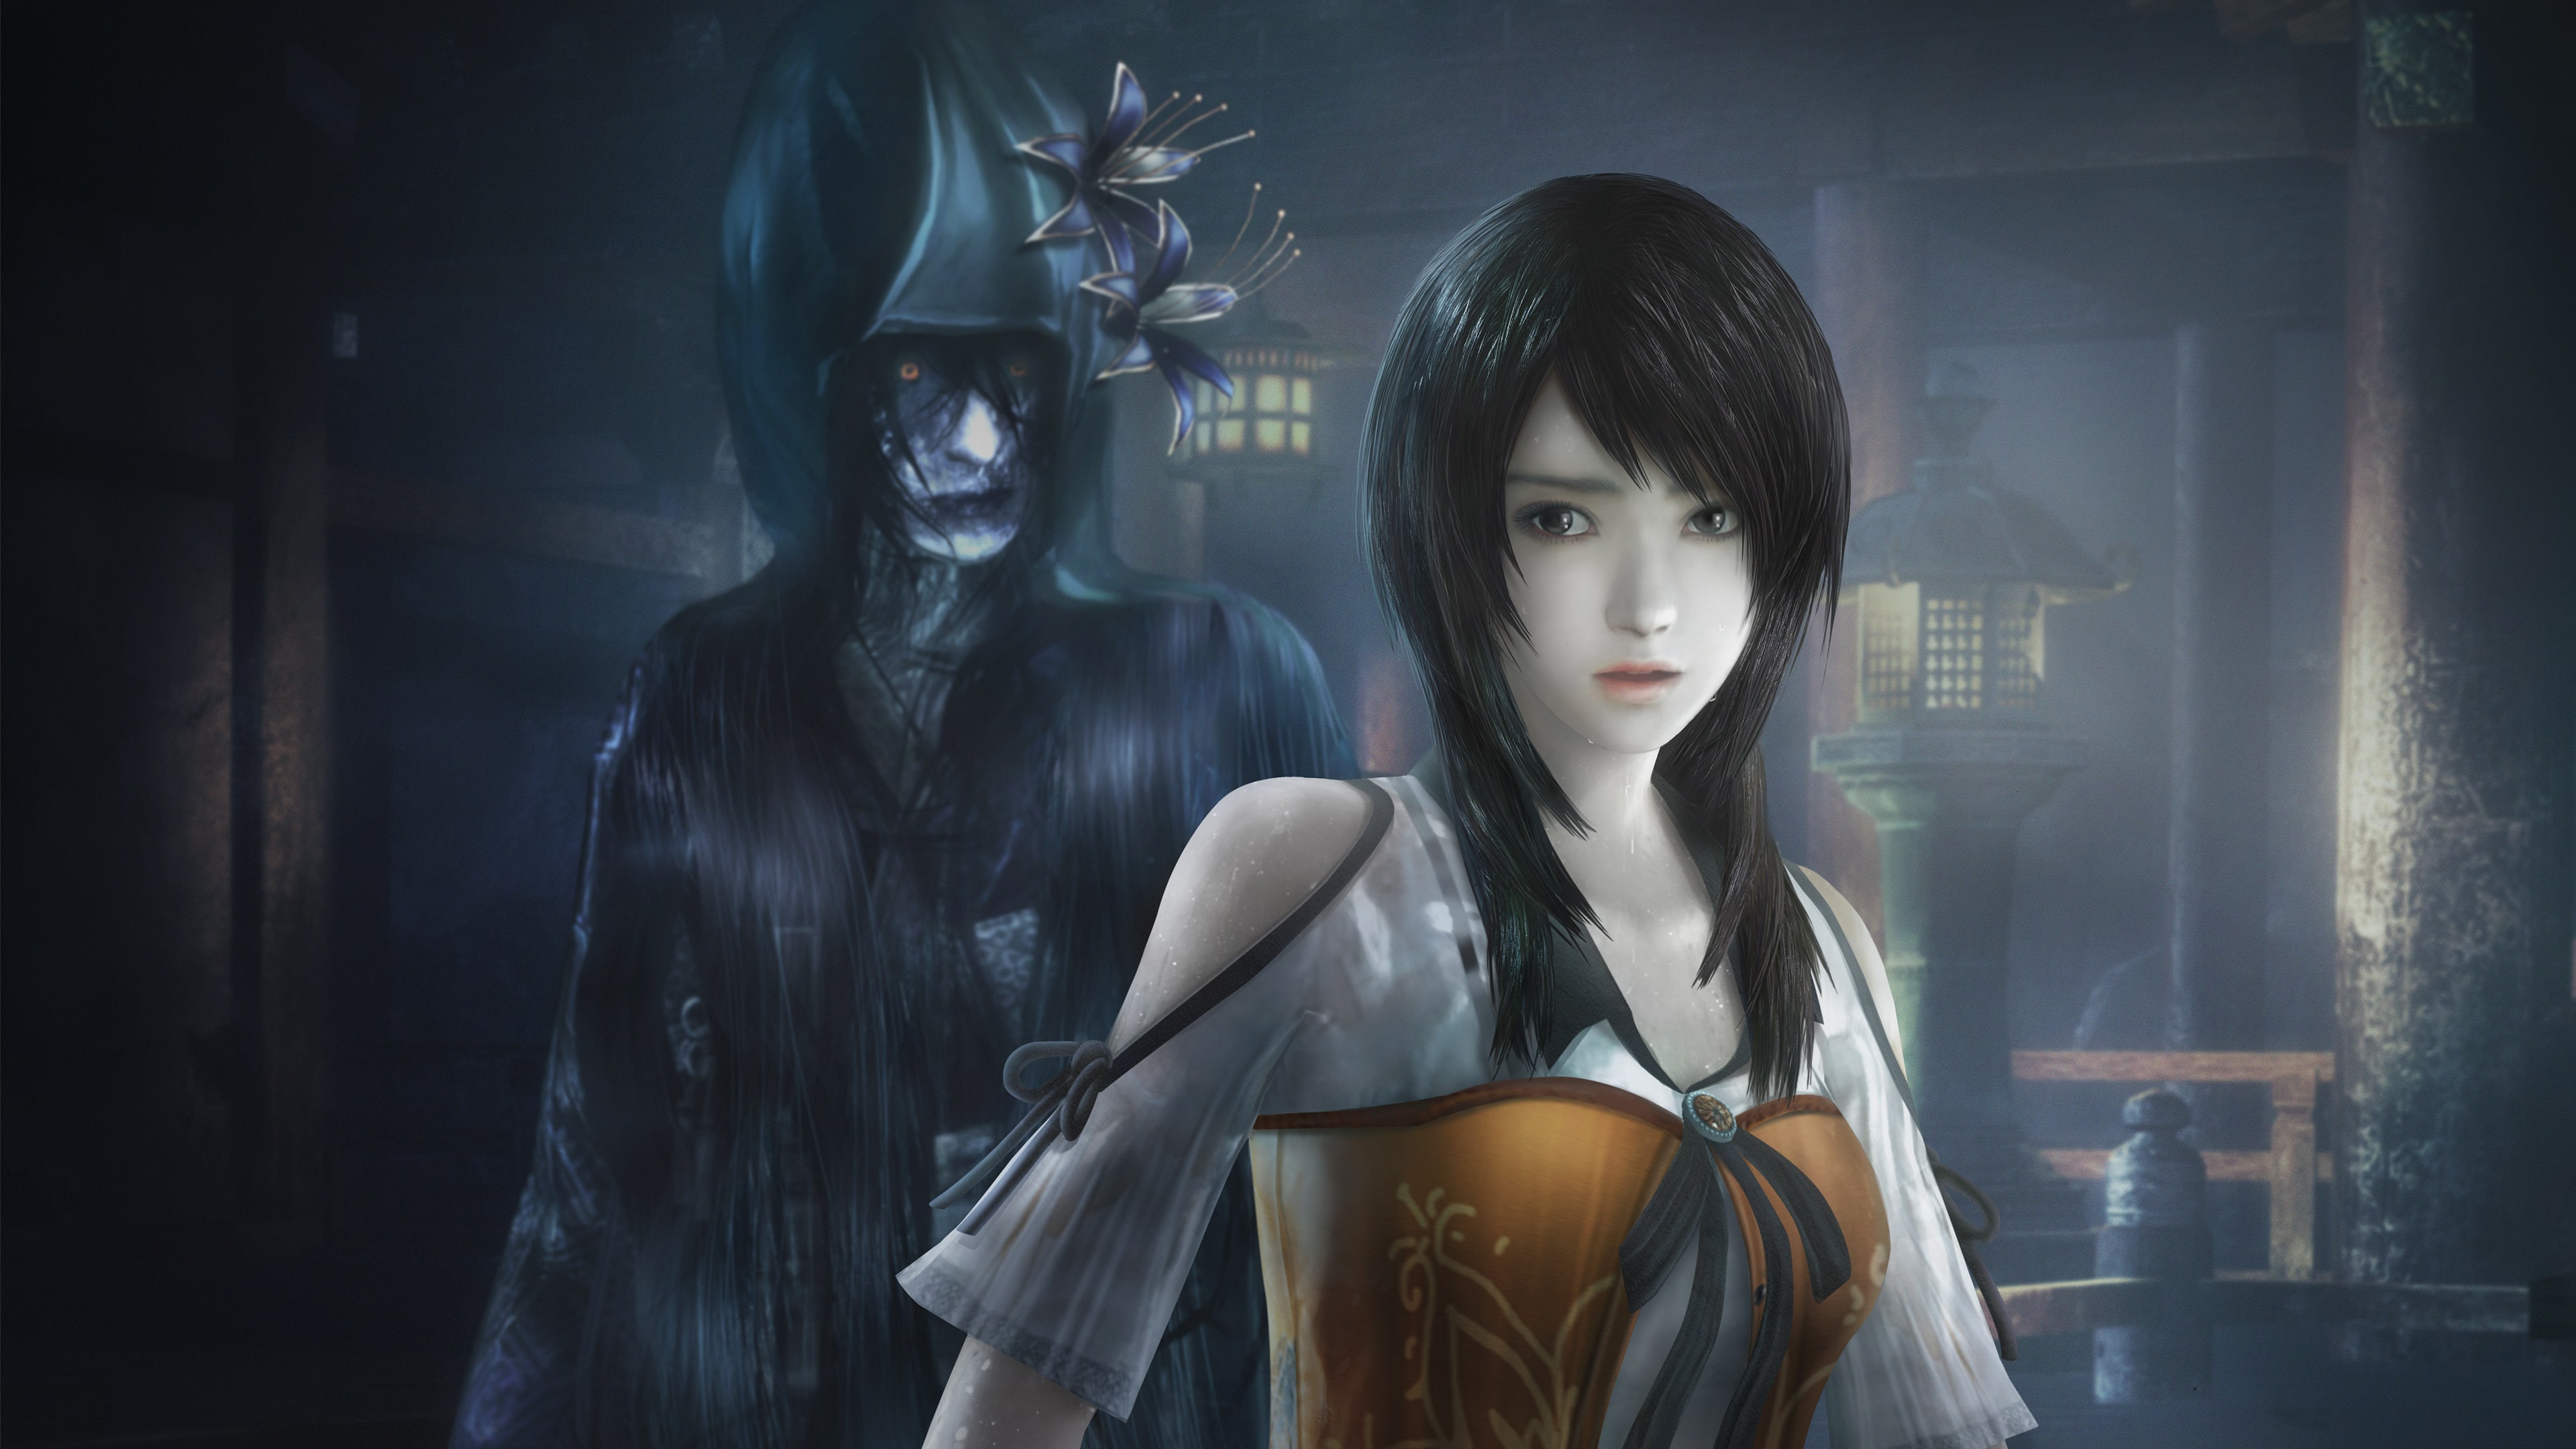 PROJECT ZERO: MAIDEN OF BLACK WATER Digital Deluxe Edition PS4 & PS5